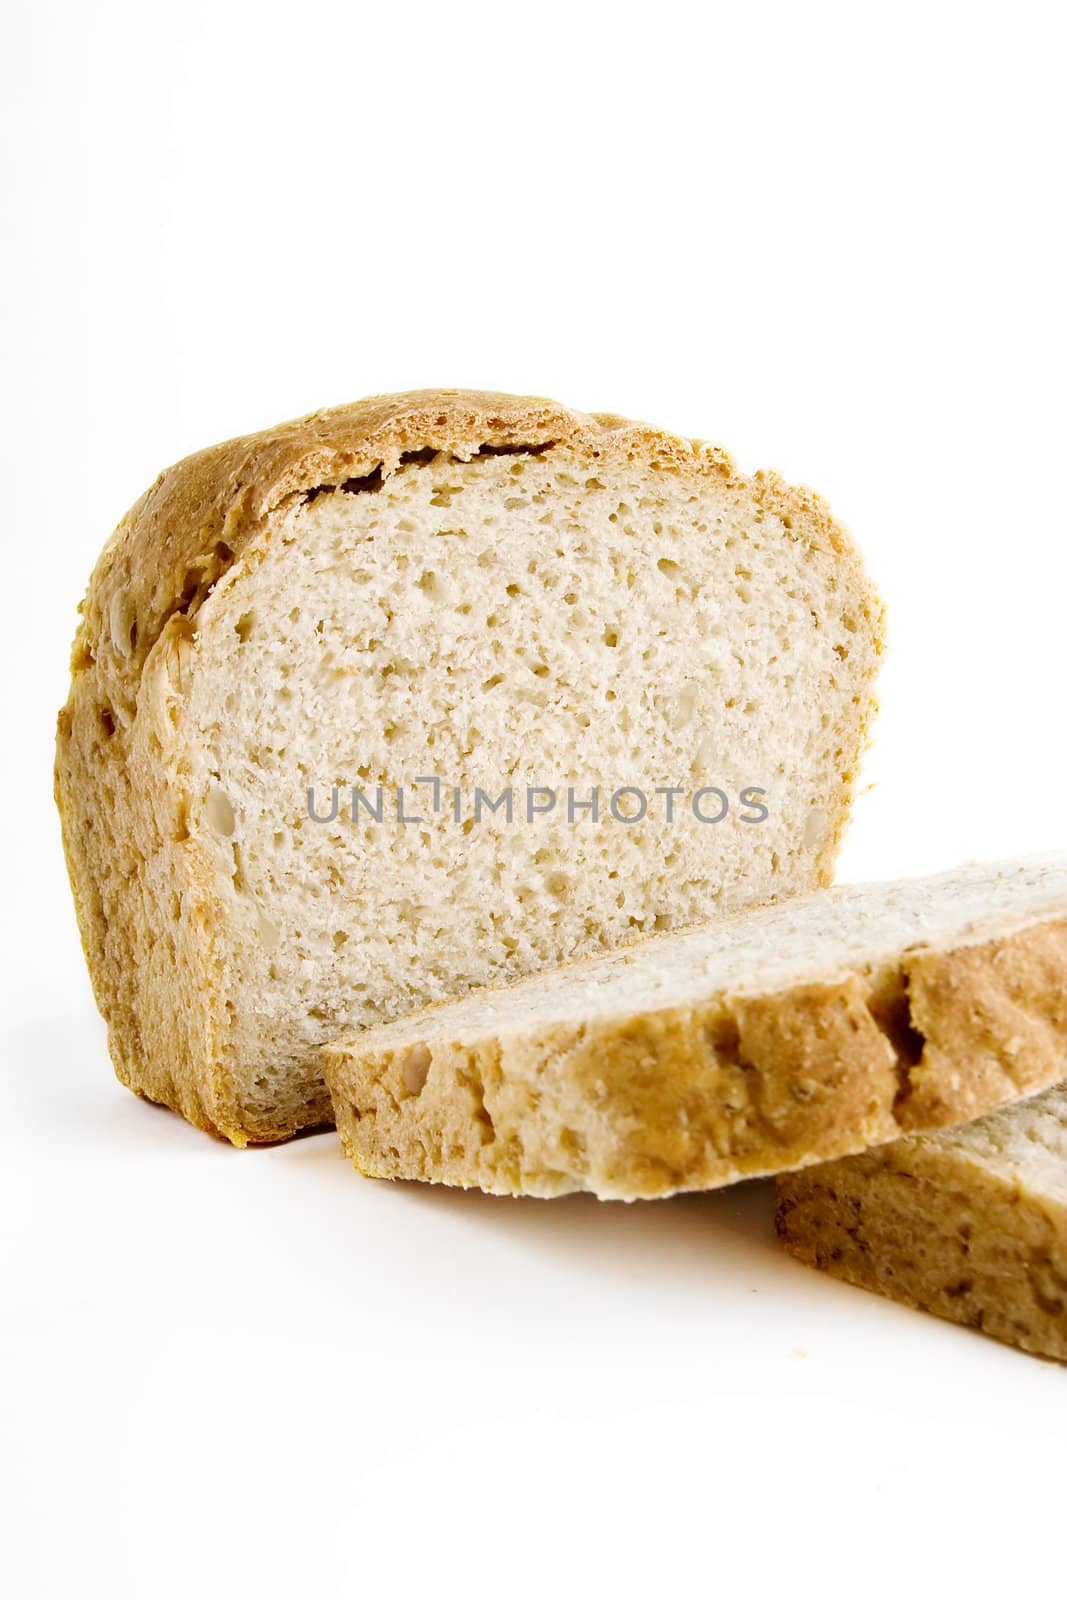 A single slice of homemade bread on a white background.